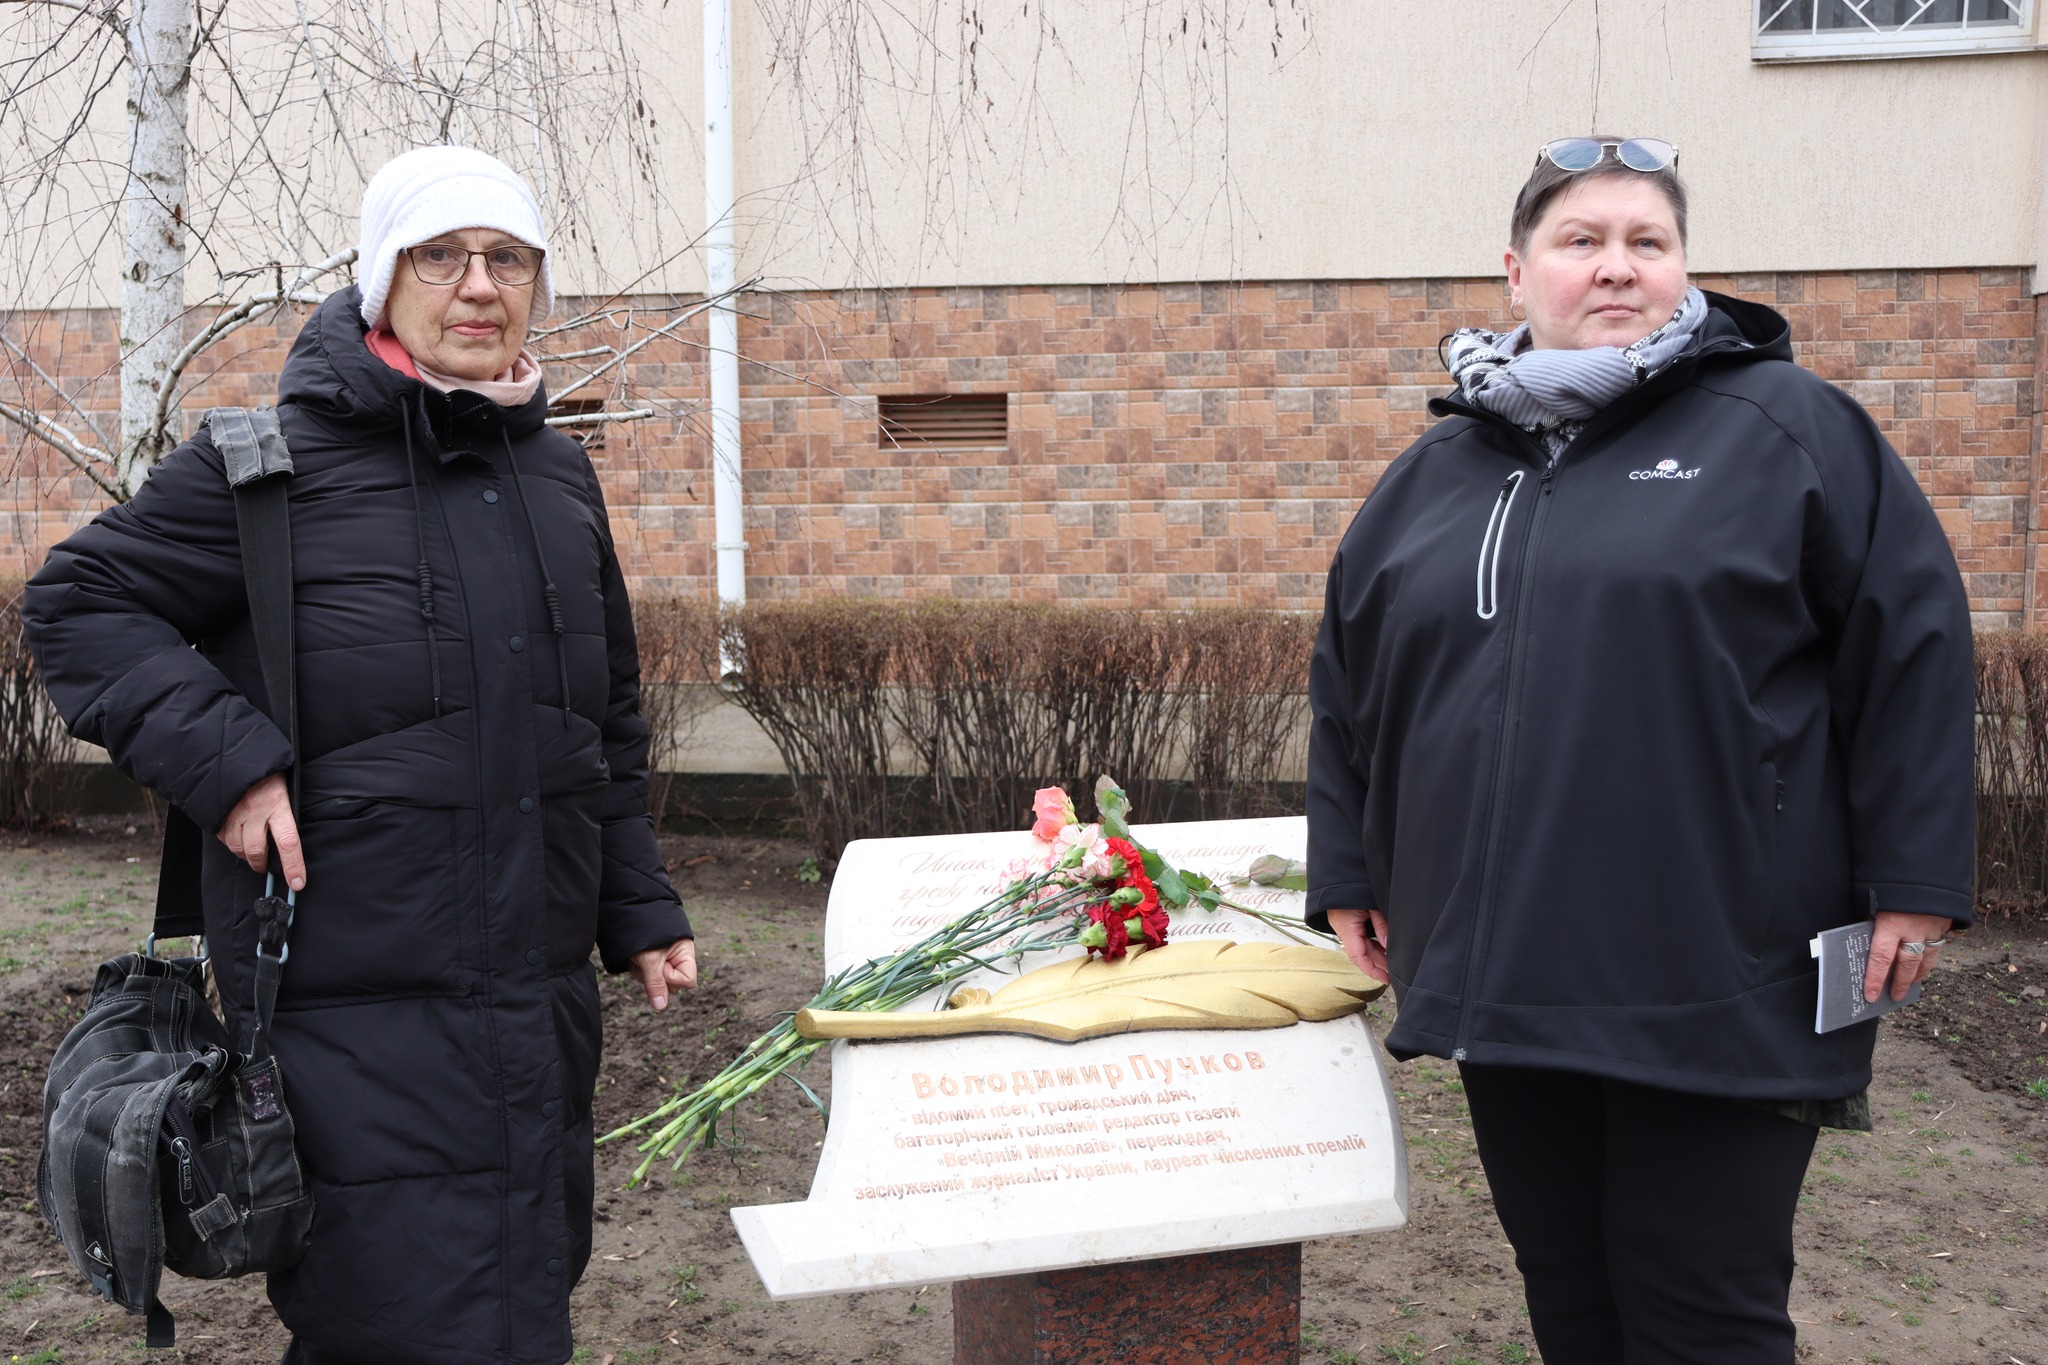 A memorial sign to Volodymyr Puchkov was unveiled in the Literary Square near the library